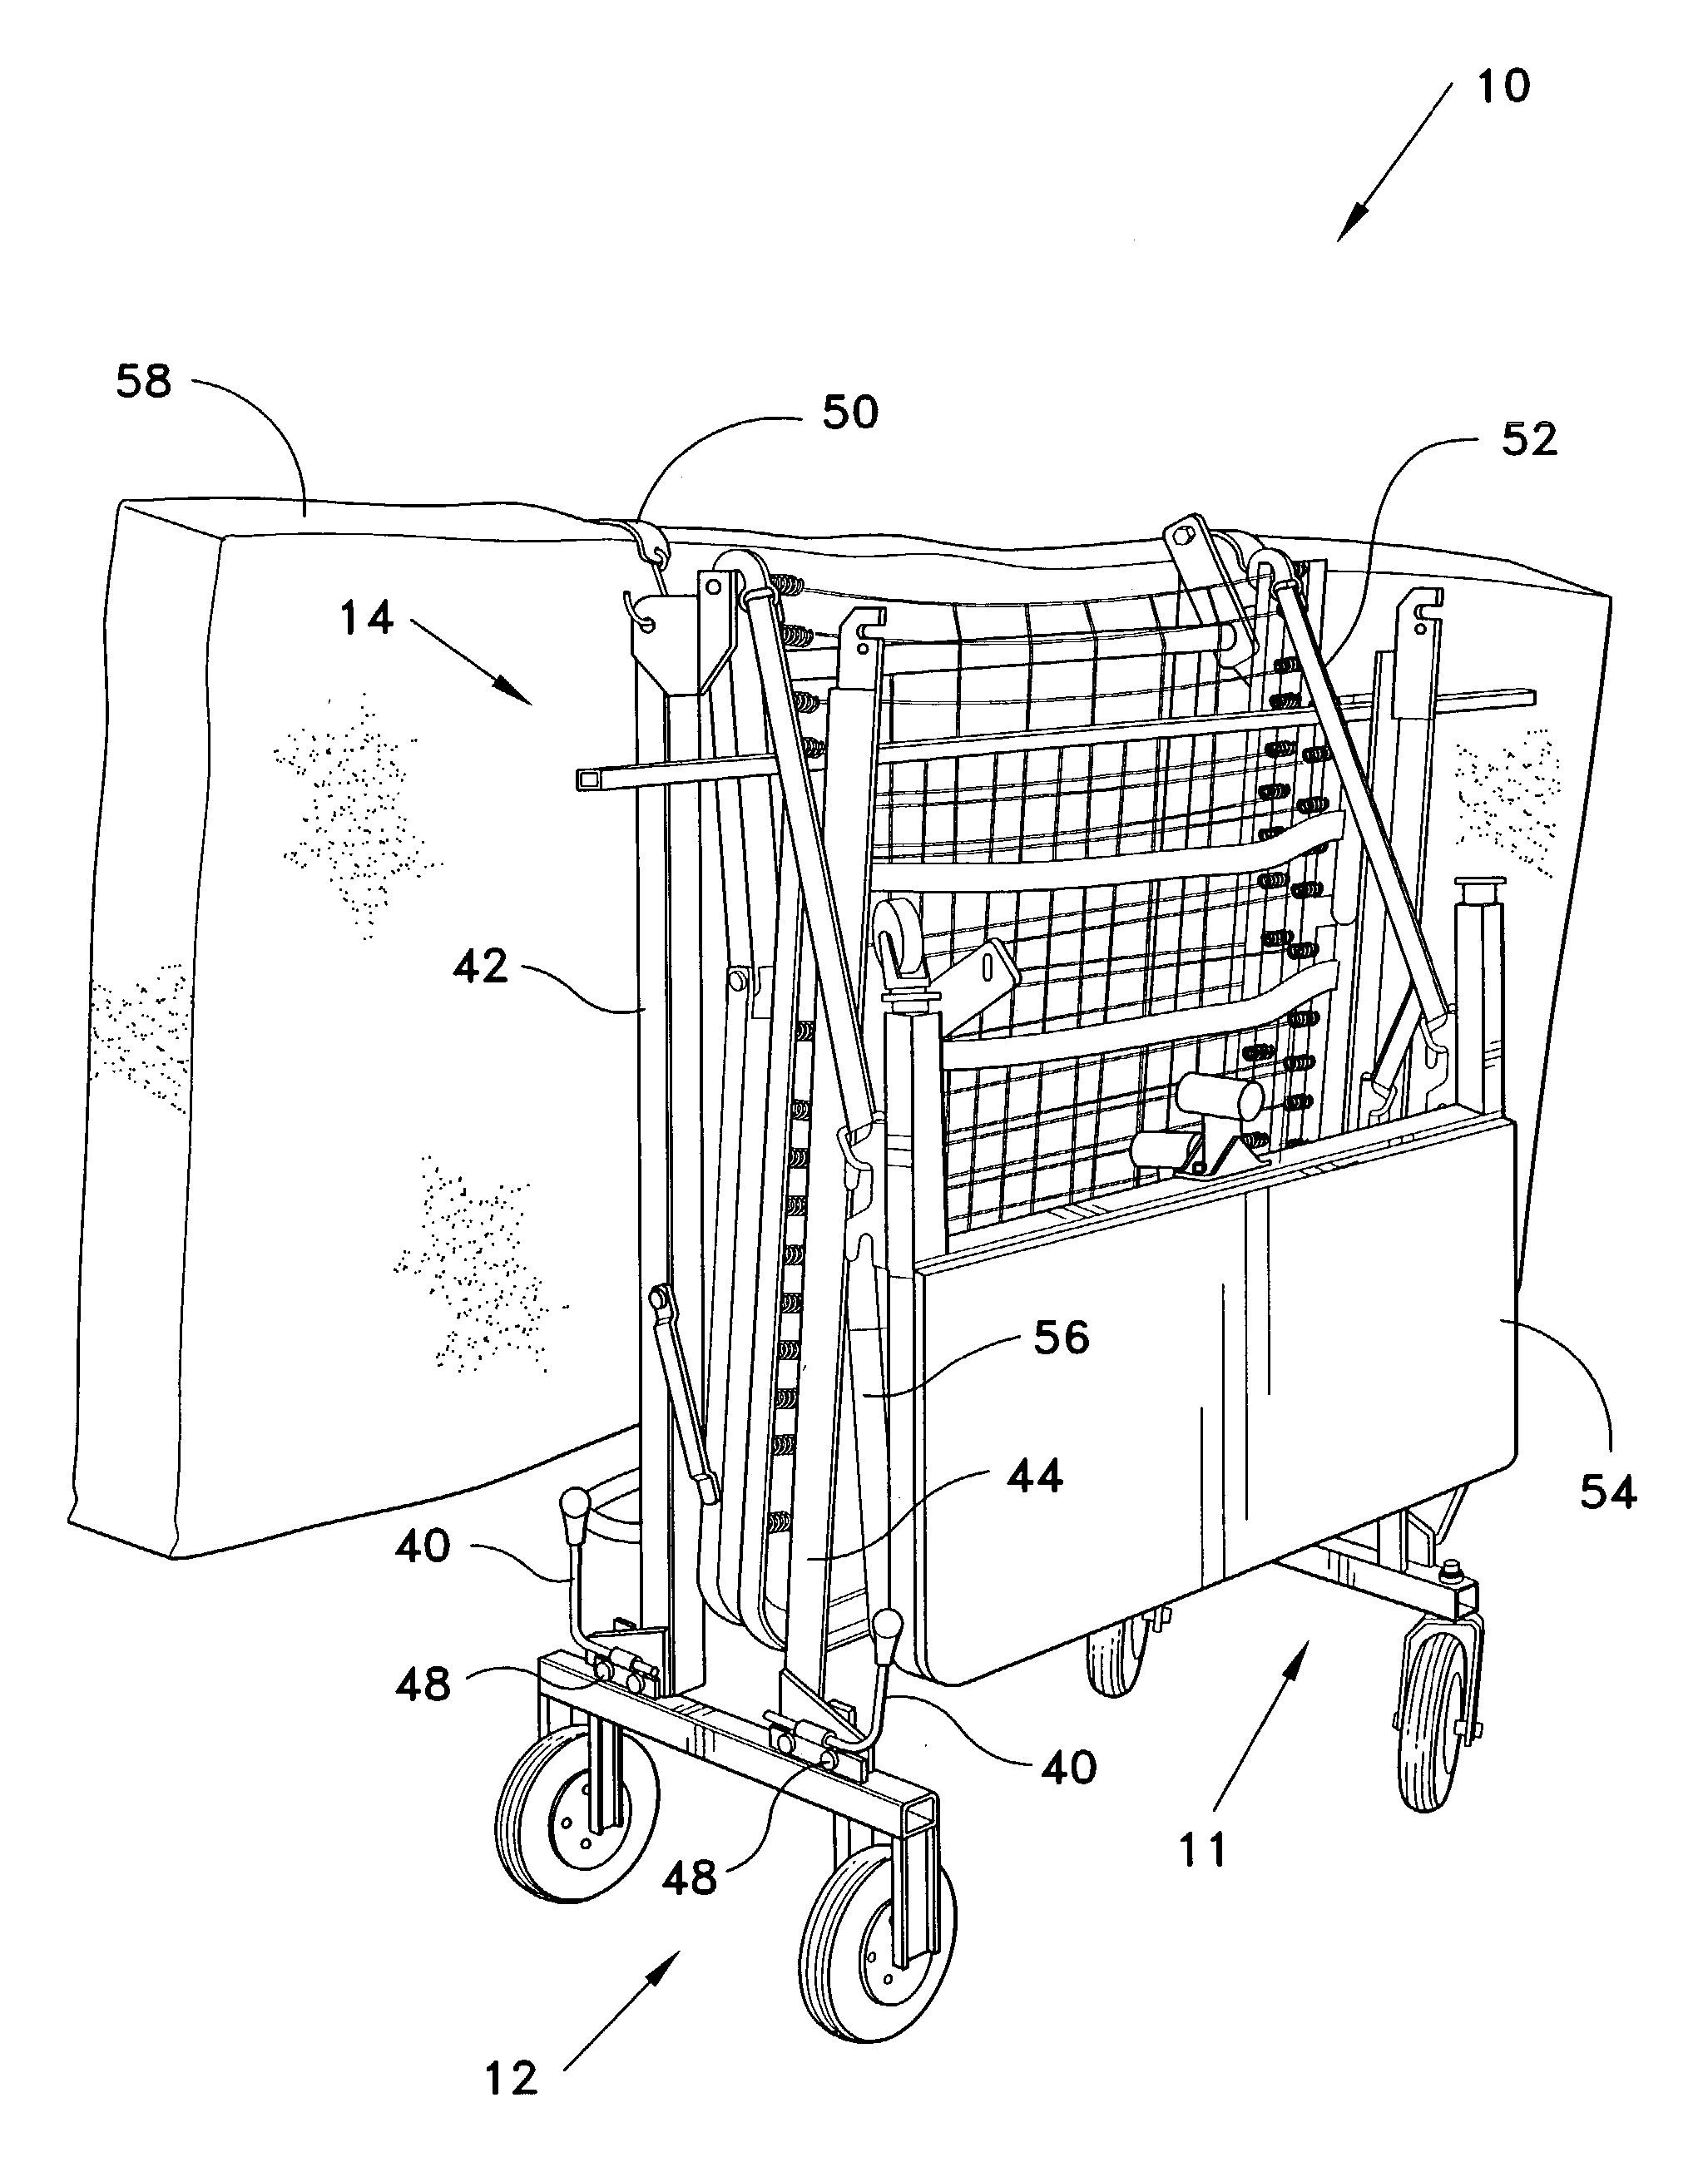 Heavy bed transporting device